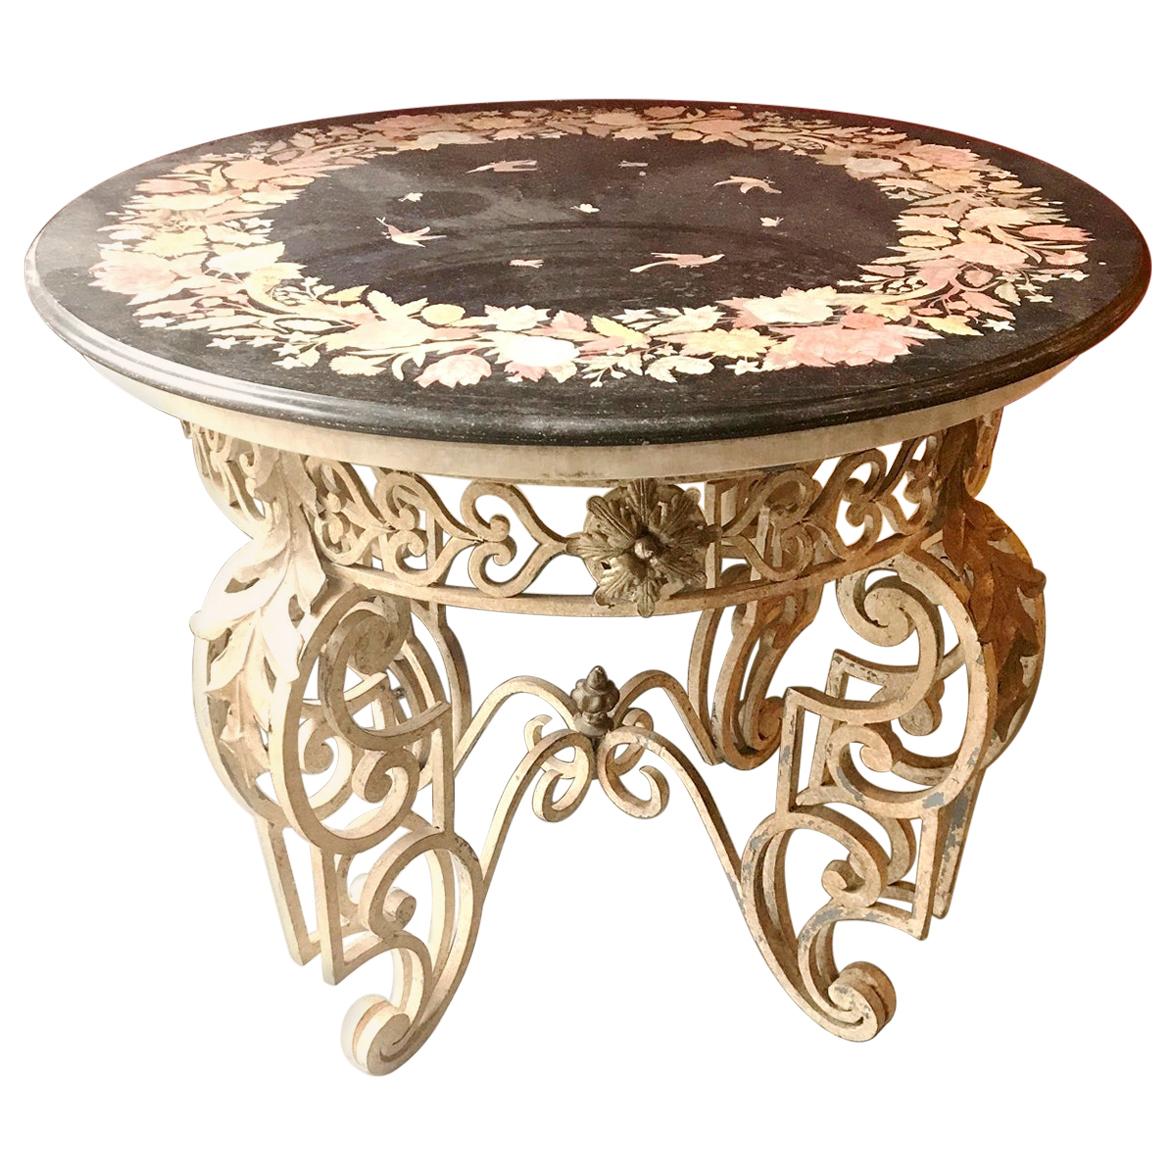 Patio Iron Table with Inlaid Marble Top